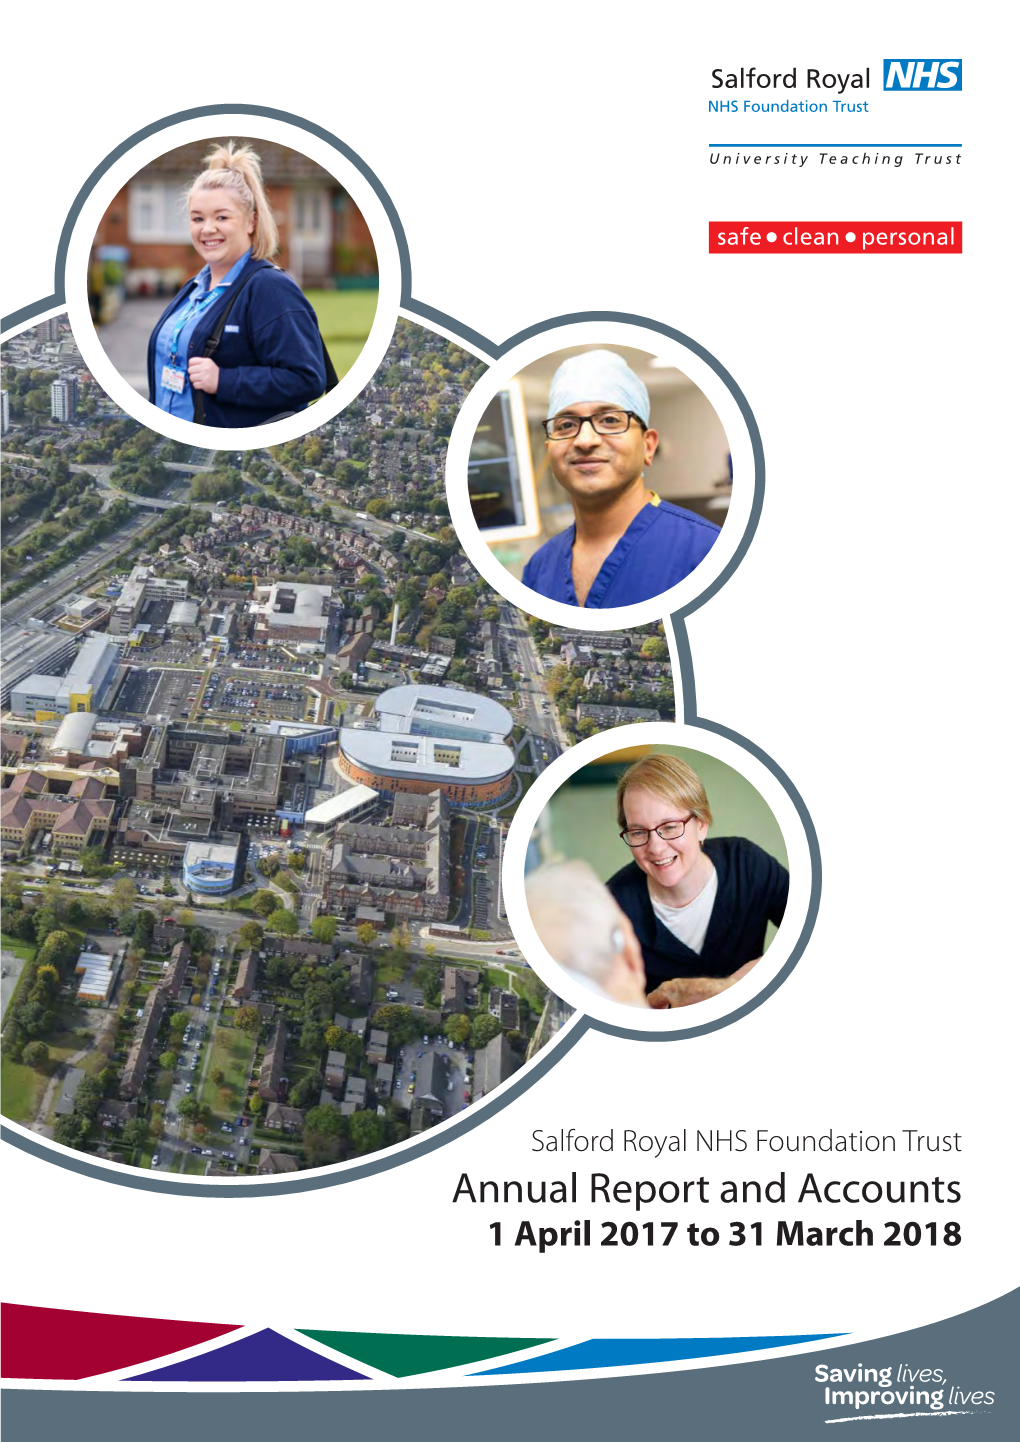 Salford Royal NHS Foundation Trust: Annual Report and Accounts 2017/18